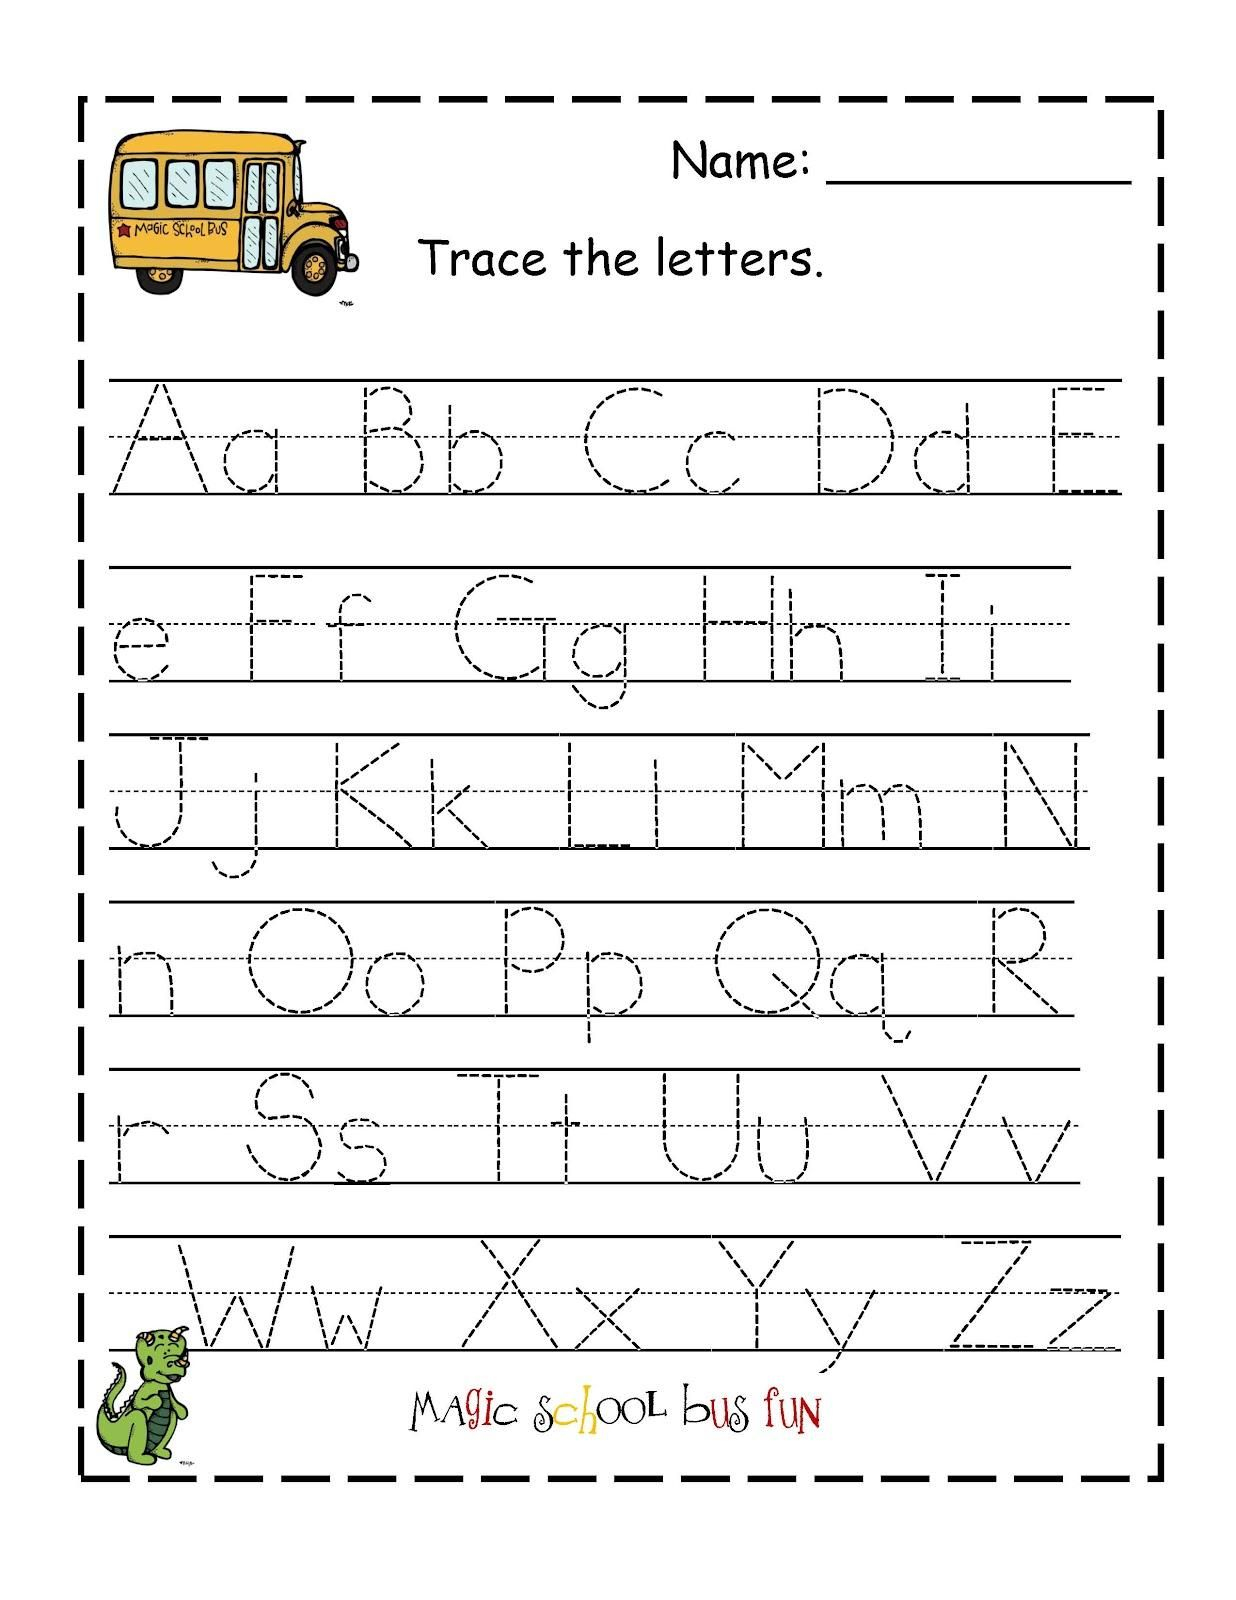 Alphabet Worksheets For 4 Year Olds In 2020 | Alphabet